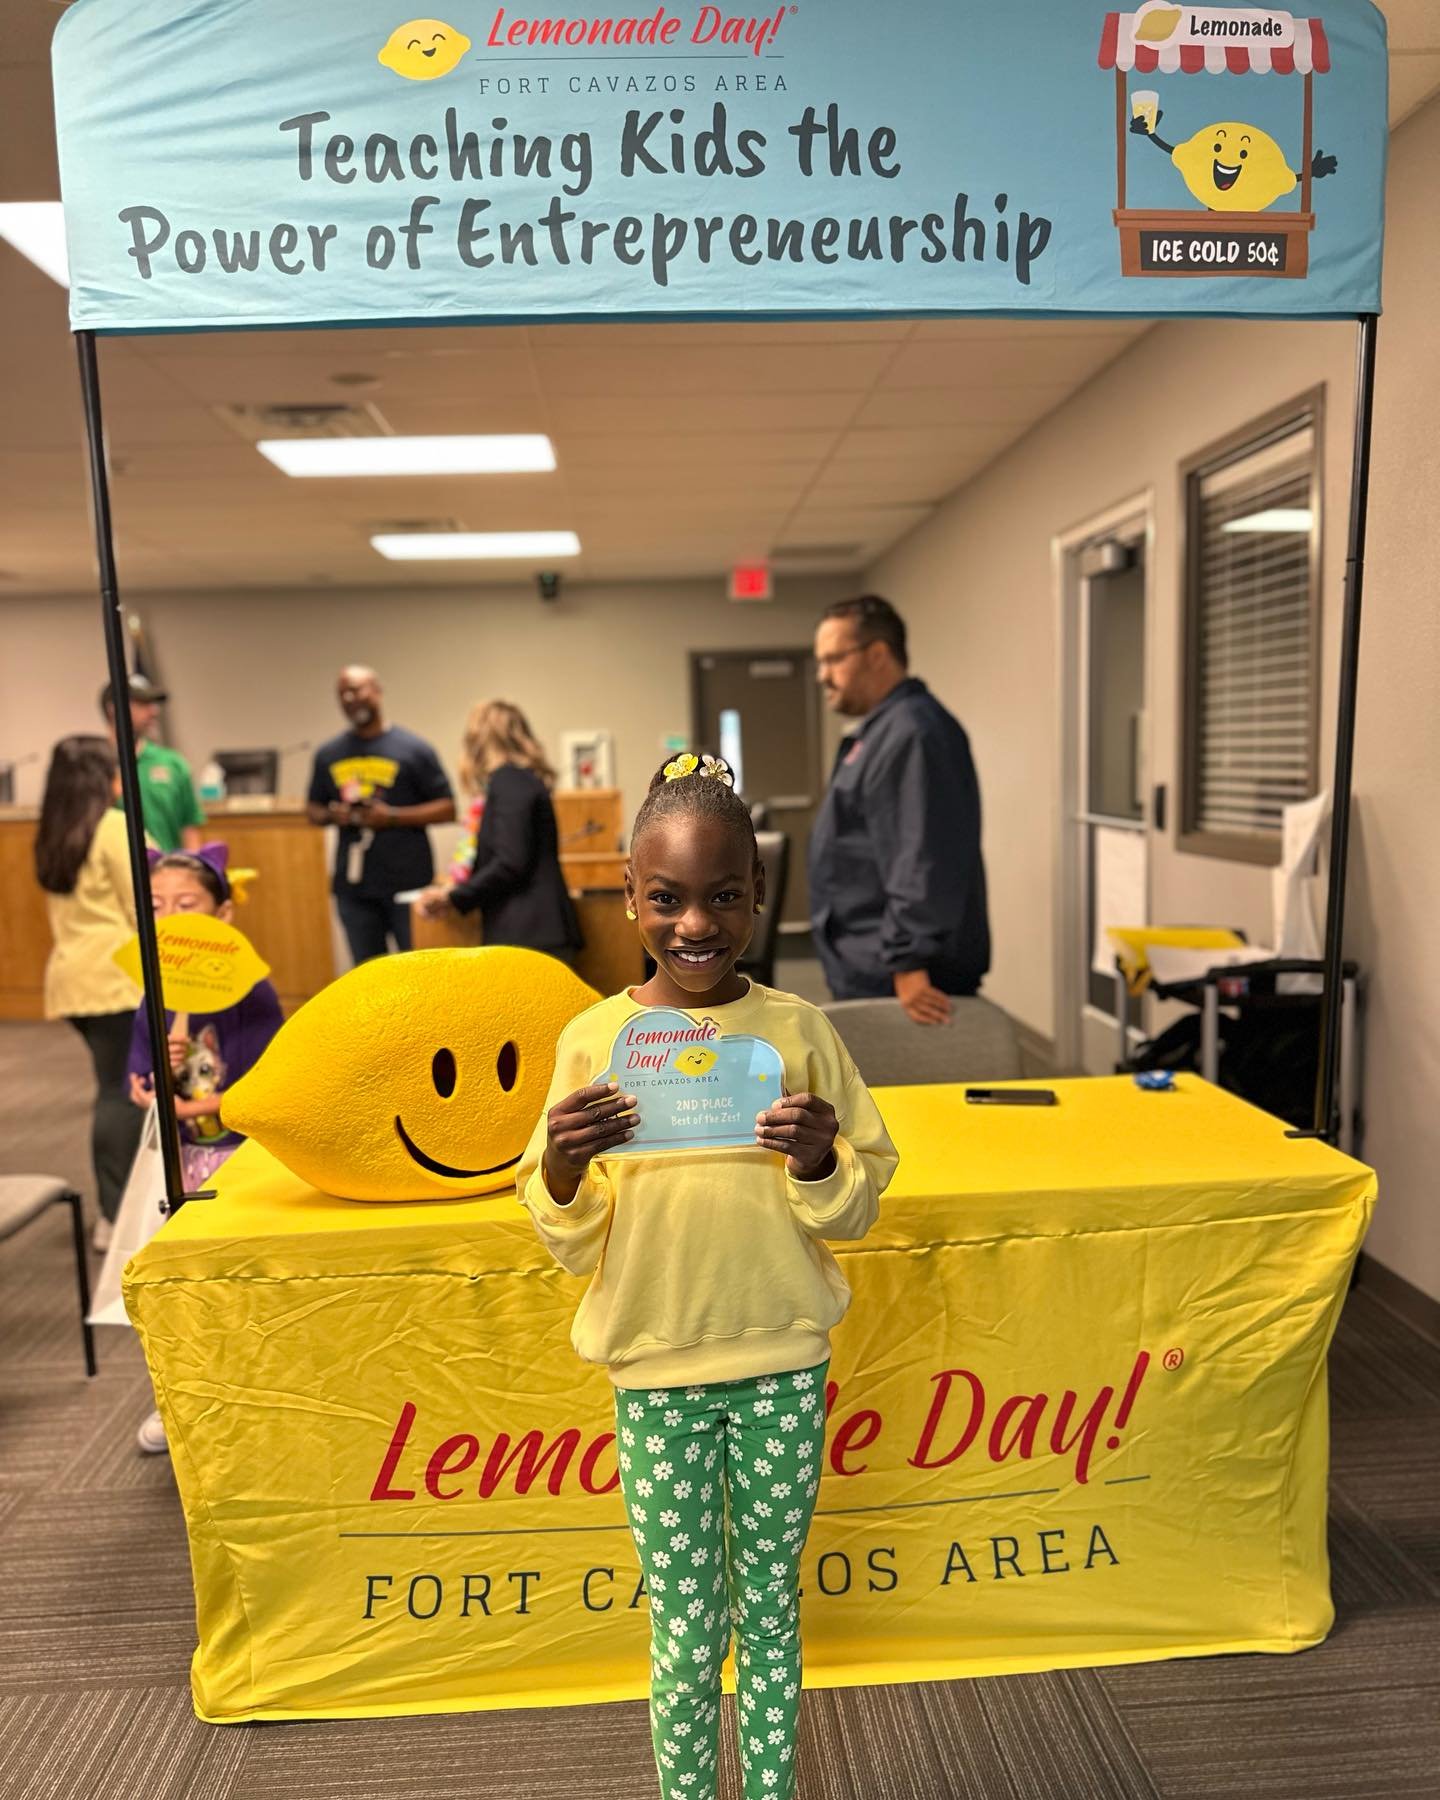 🍋 Today I entered the Lemon Tank &amp; competed in the Best Of The Zest competition and earned 2nd Place 🥈!! Me &amp; my fellow lemon bosses each had to do a presentation about our lemonade stands and pitch it to panel of judges. 

🎤 I&rsquo;m get